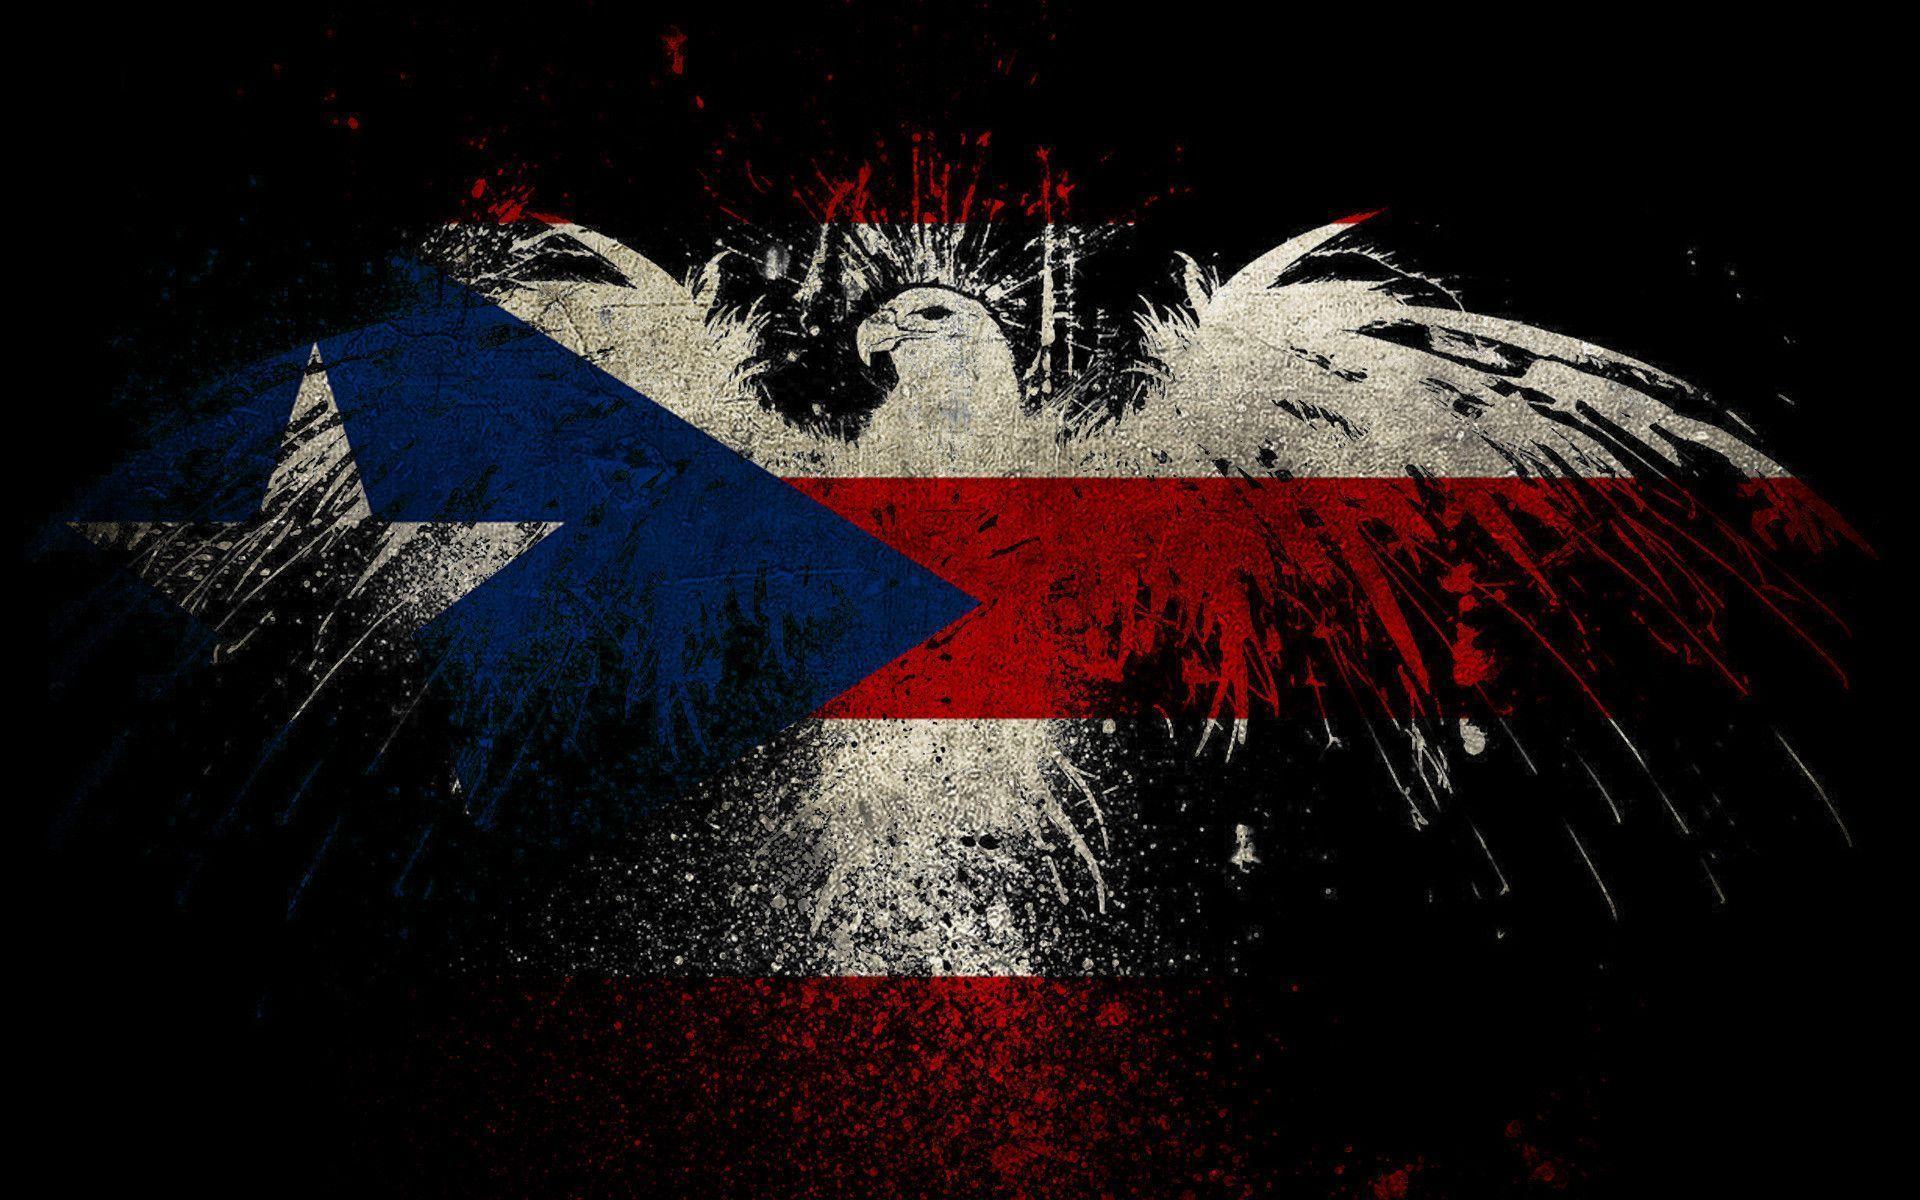 Gallery For Gt Cool Puerto Rican Flag Wallpaper